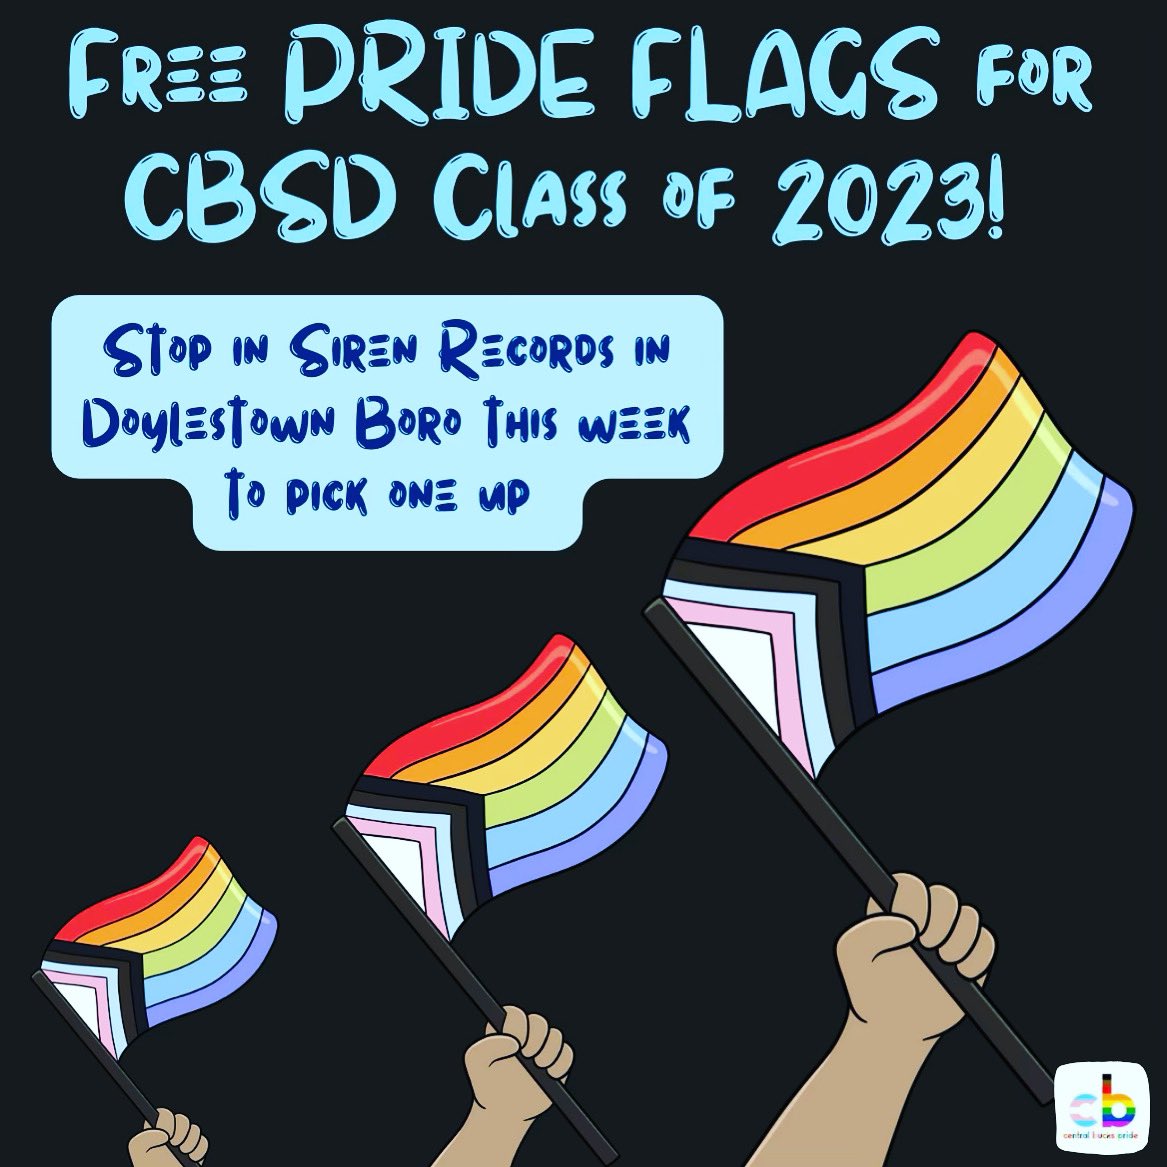 Every day until graduation on Thursday, any graduating senior from the Central Bucks School District is welcome to pick up a free small, hand-held, pride plag at Siren Records in Doylestown. Congratulations, we love you, we stand with you, and happy pride!